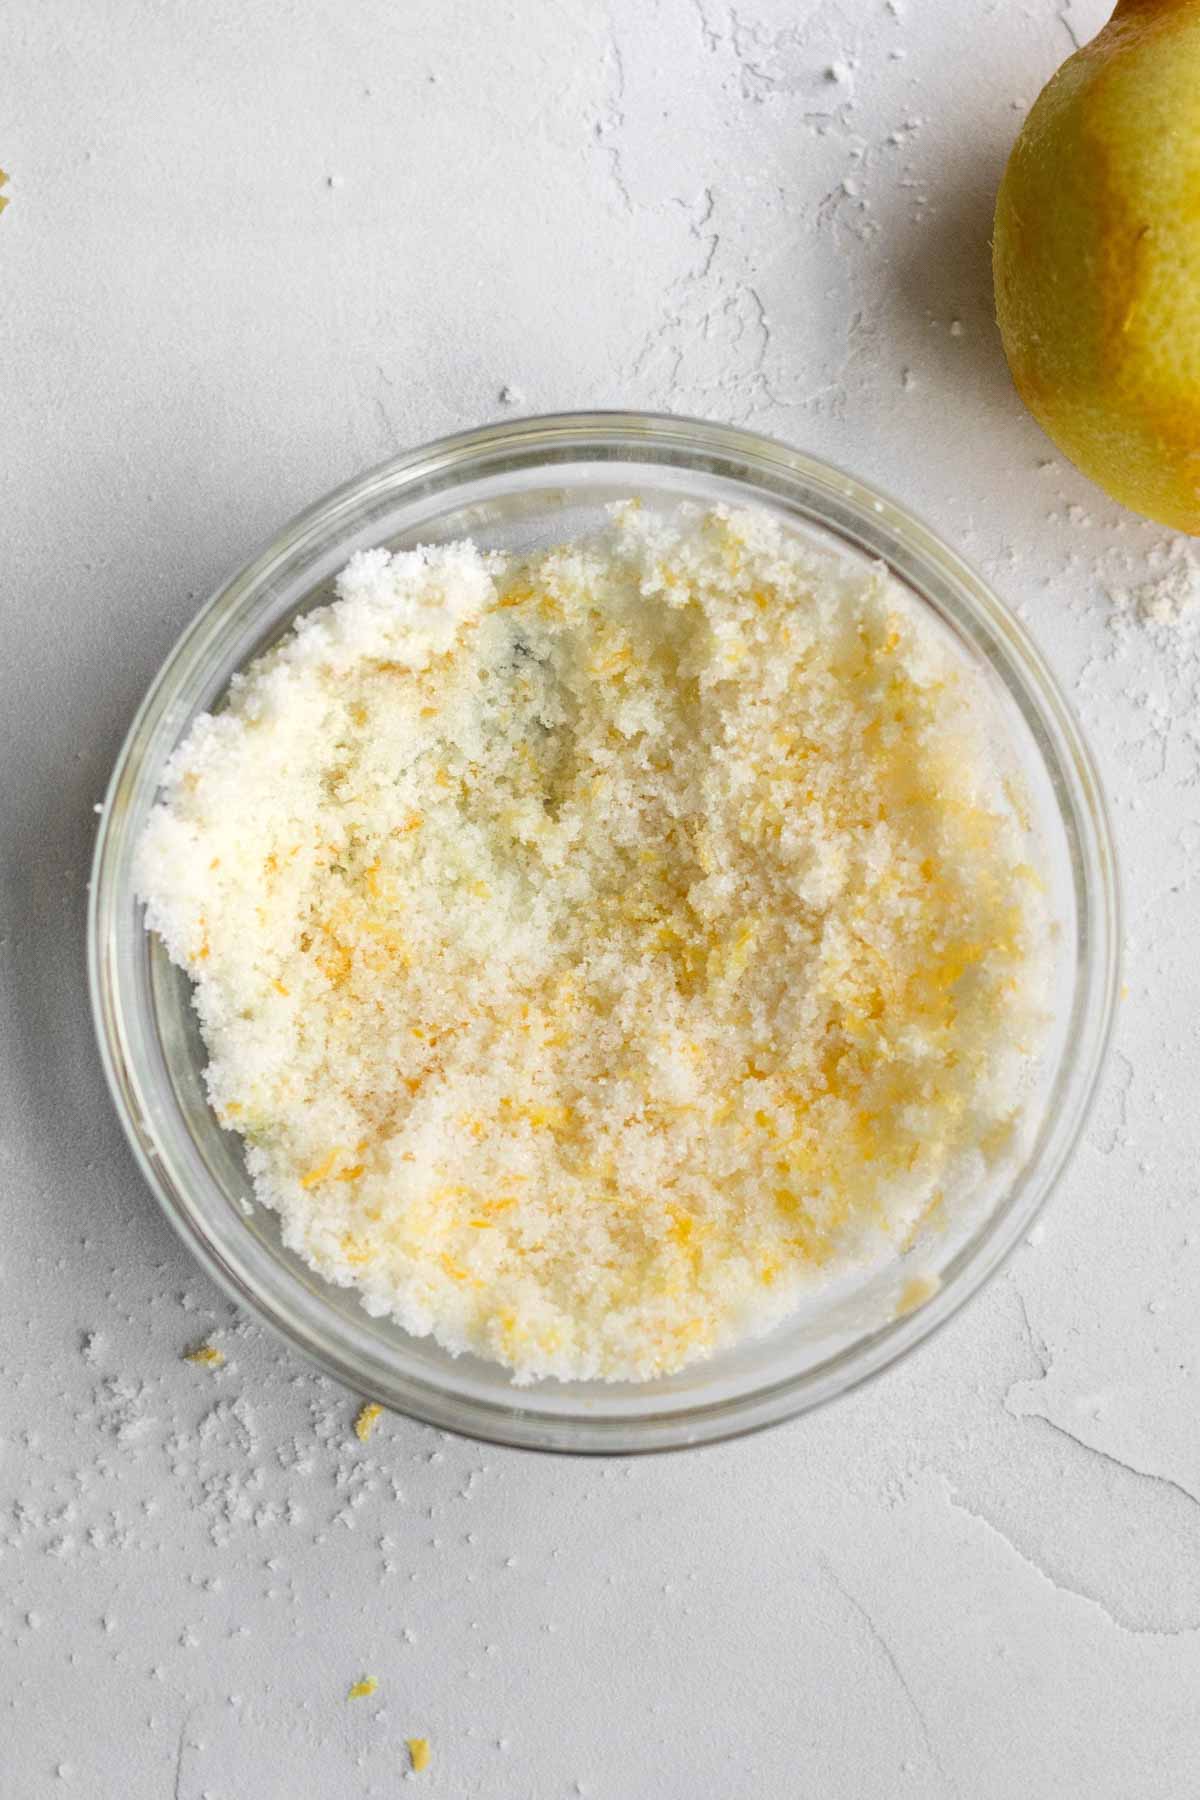 Mixing the lemon zest into the sugar.